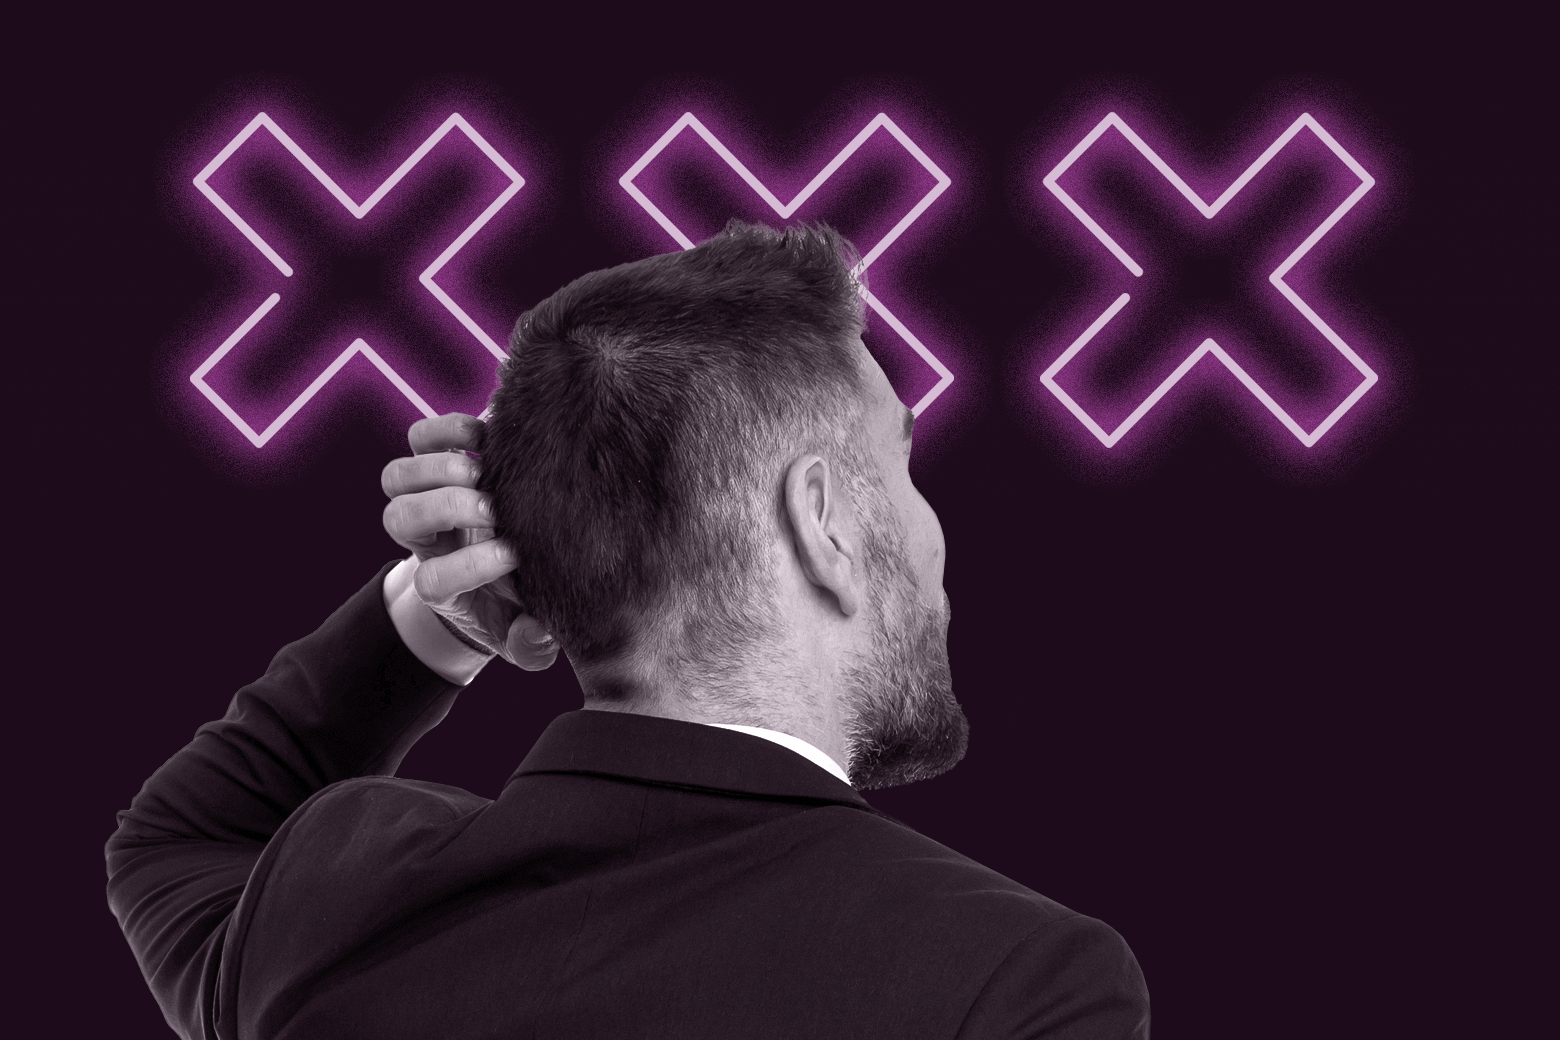 Man scratching his head with multiple Xs above him.